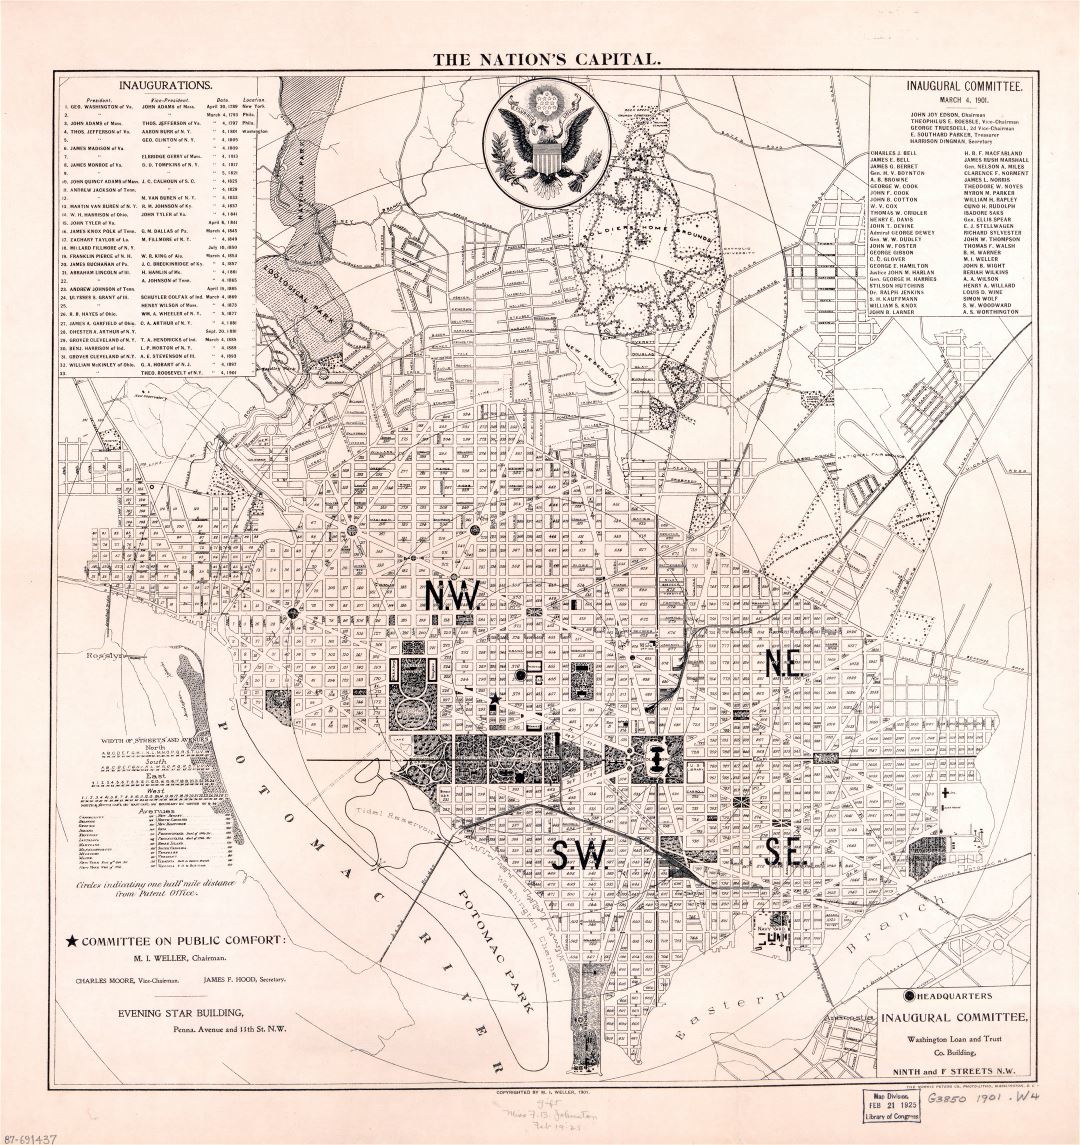 Large scale old map of the Nation's Capital Washington D.C. - 1901